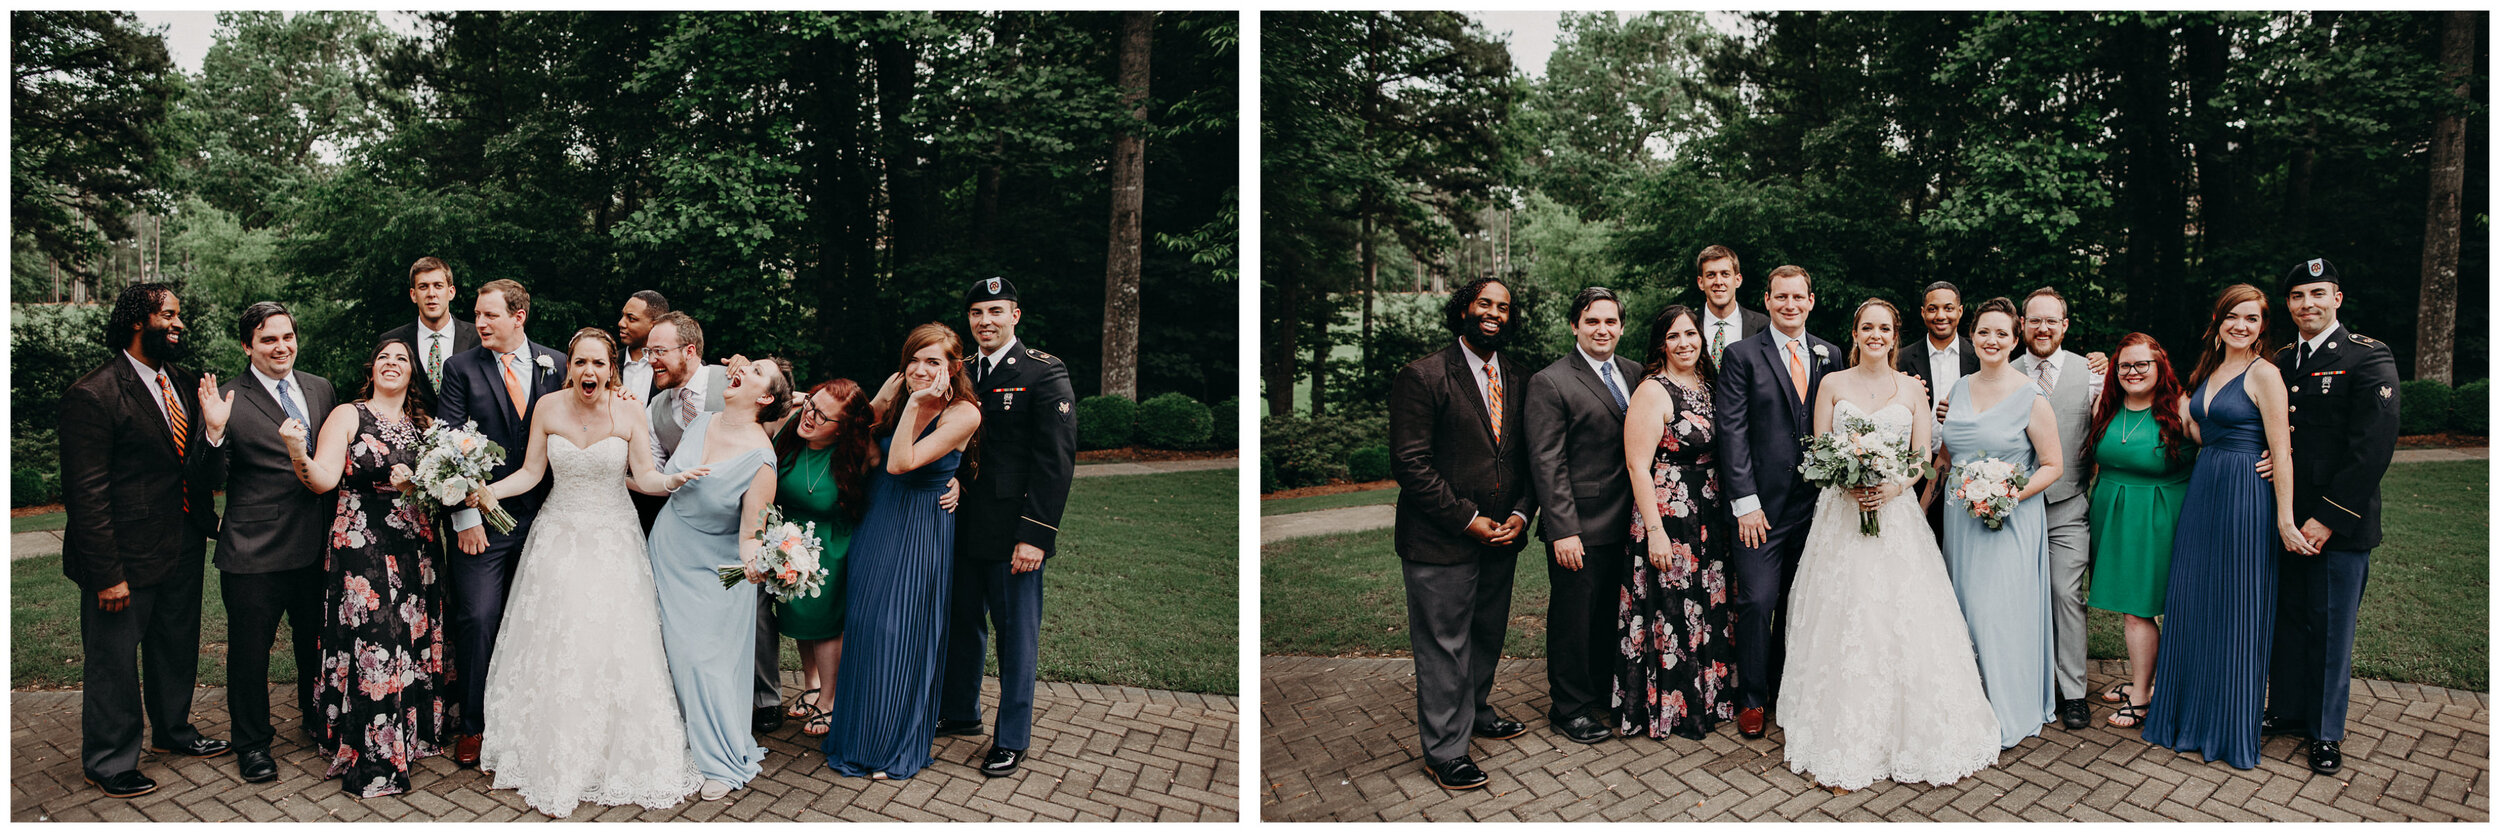 Christa & Ben's Wedding Day || Atlanta Spring Wedding at The Country Club of The South58.jpg